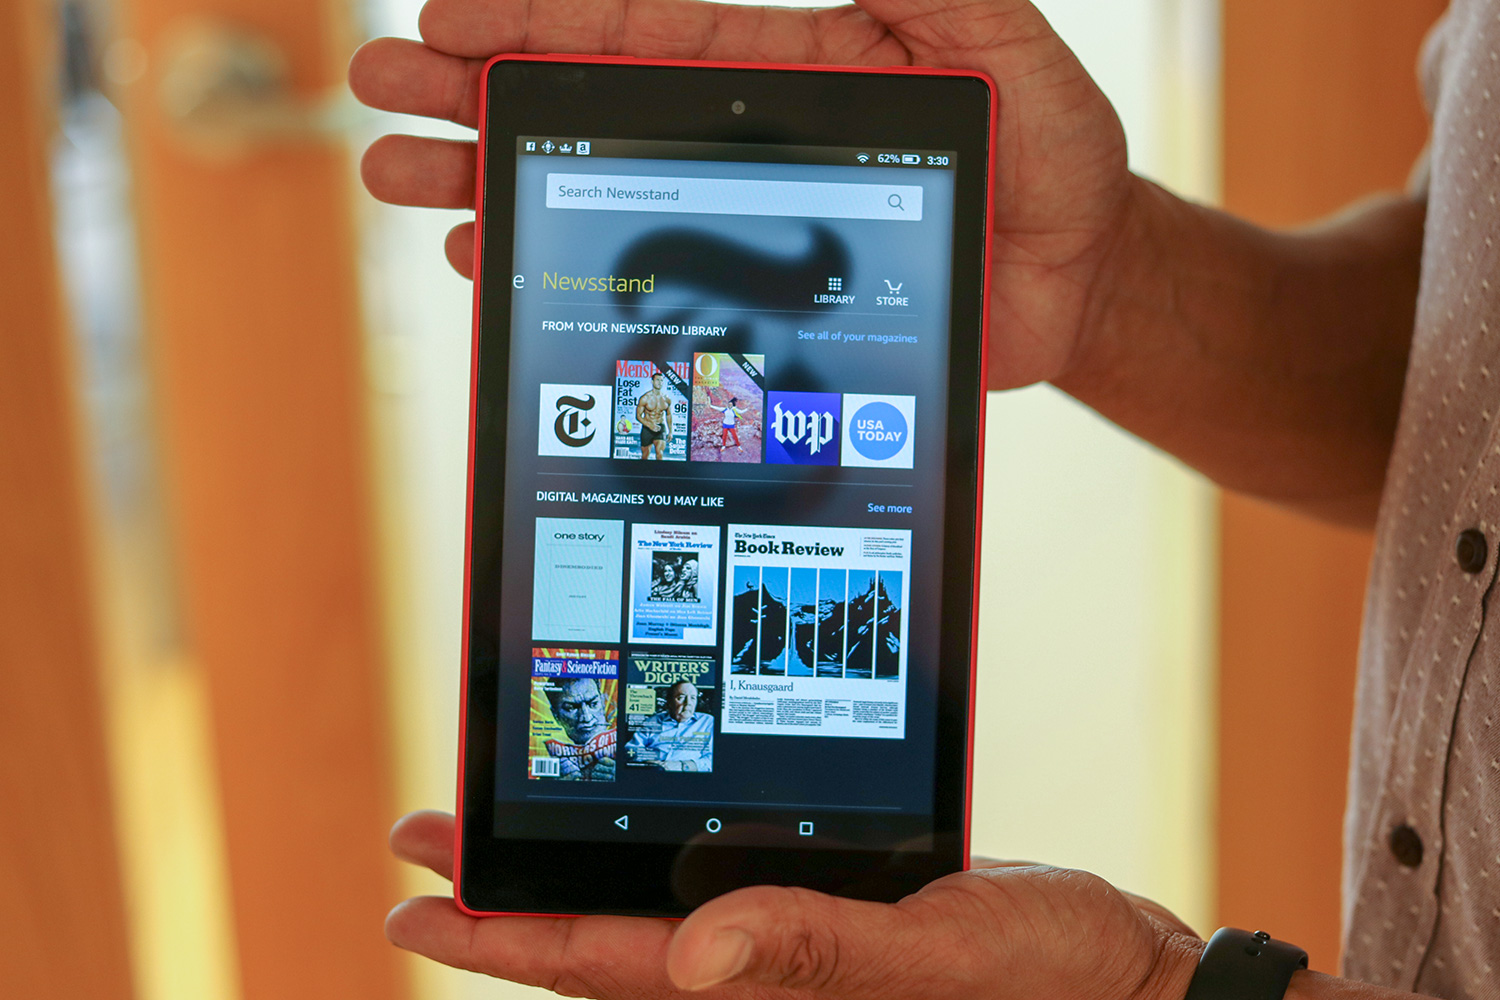 6 must-have video apps for the new Kindle Fire